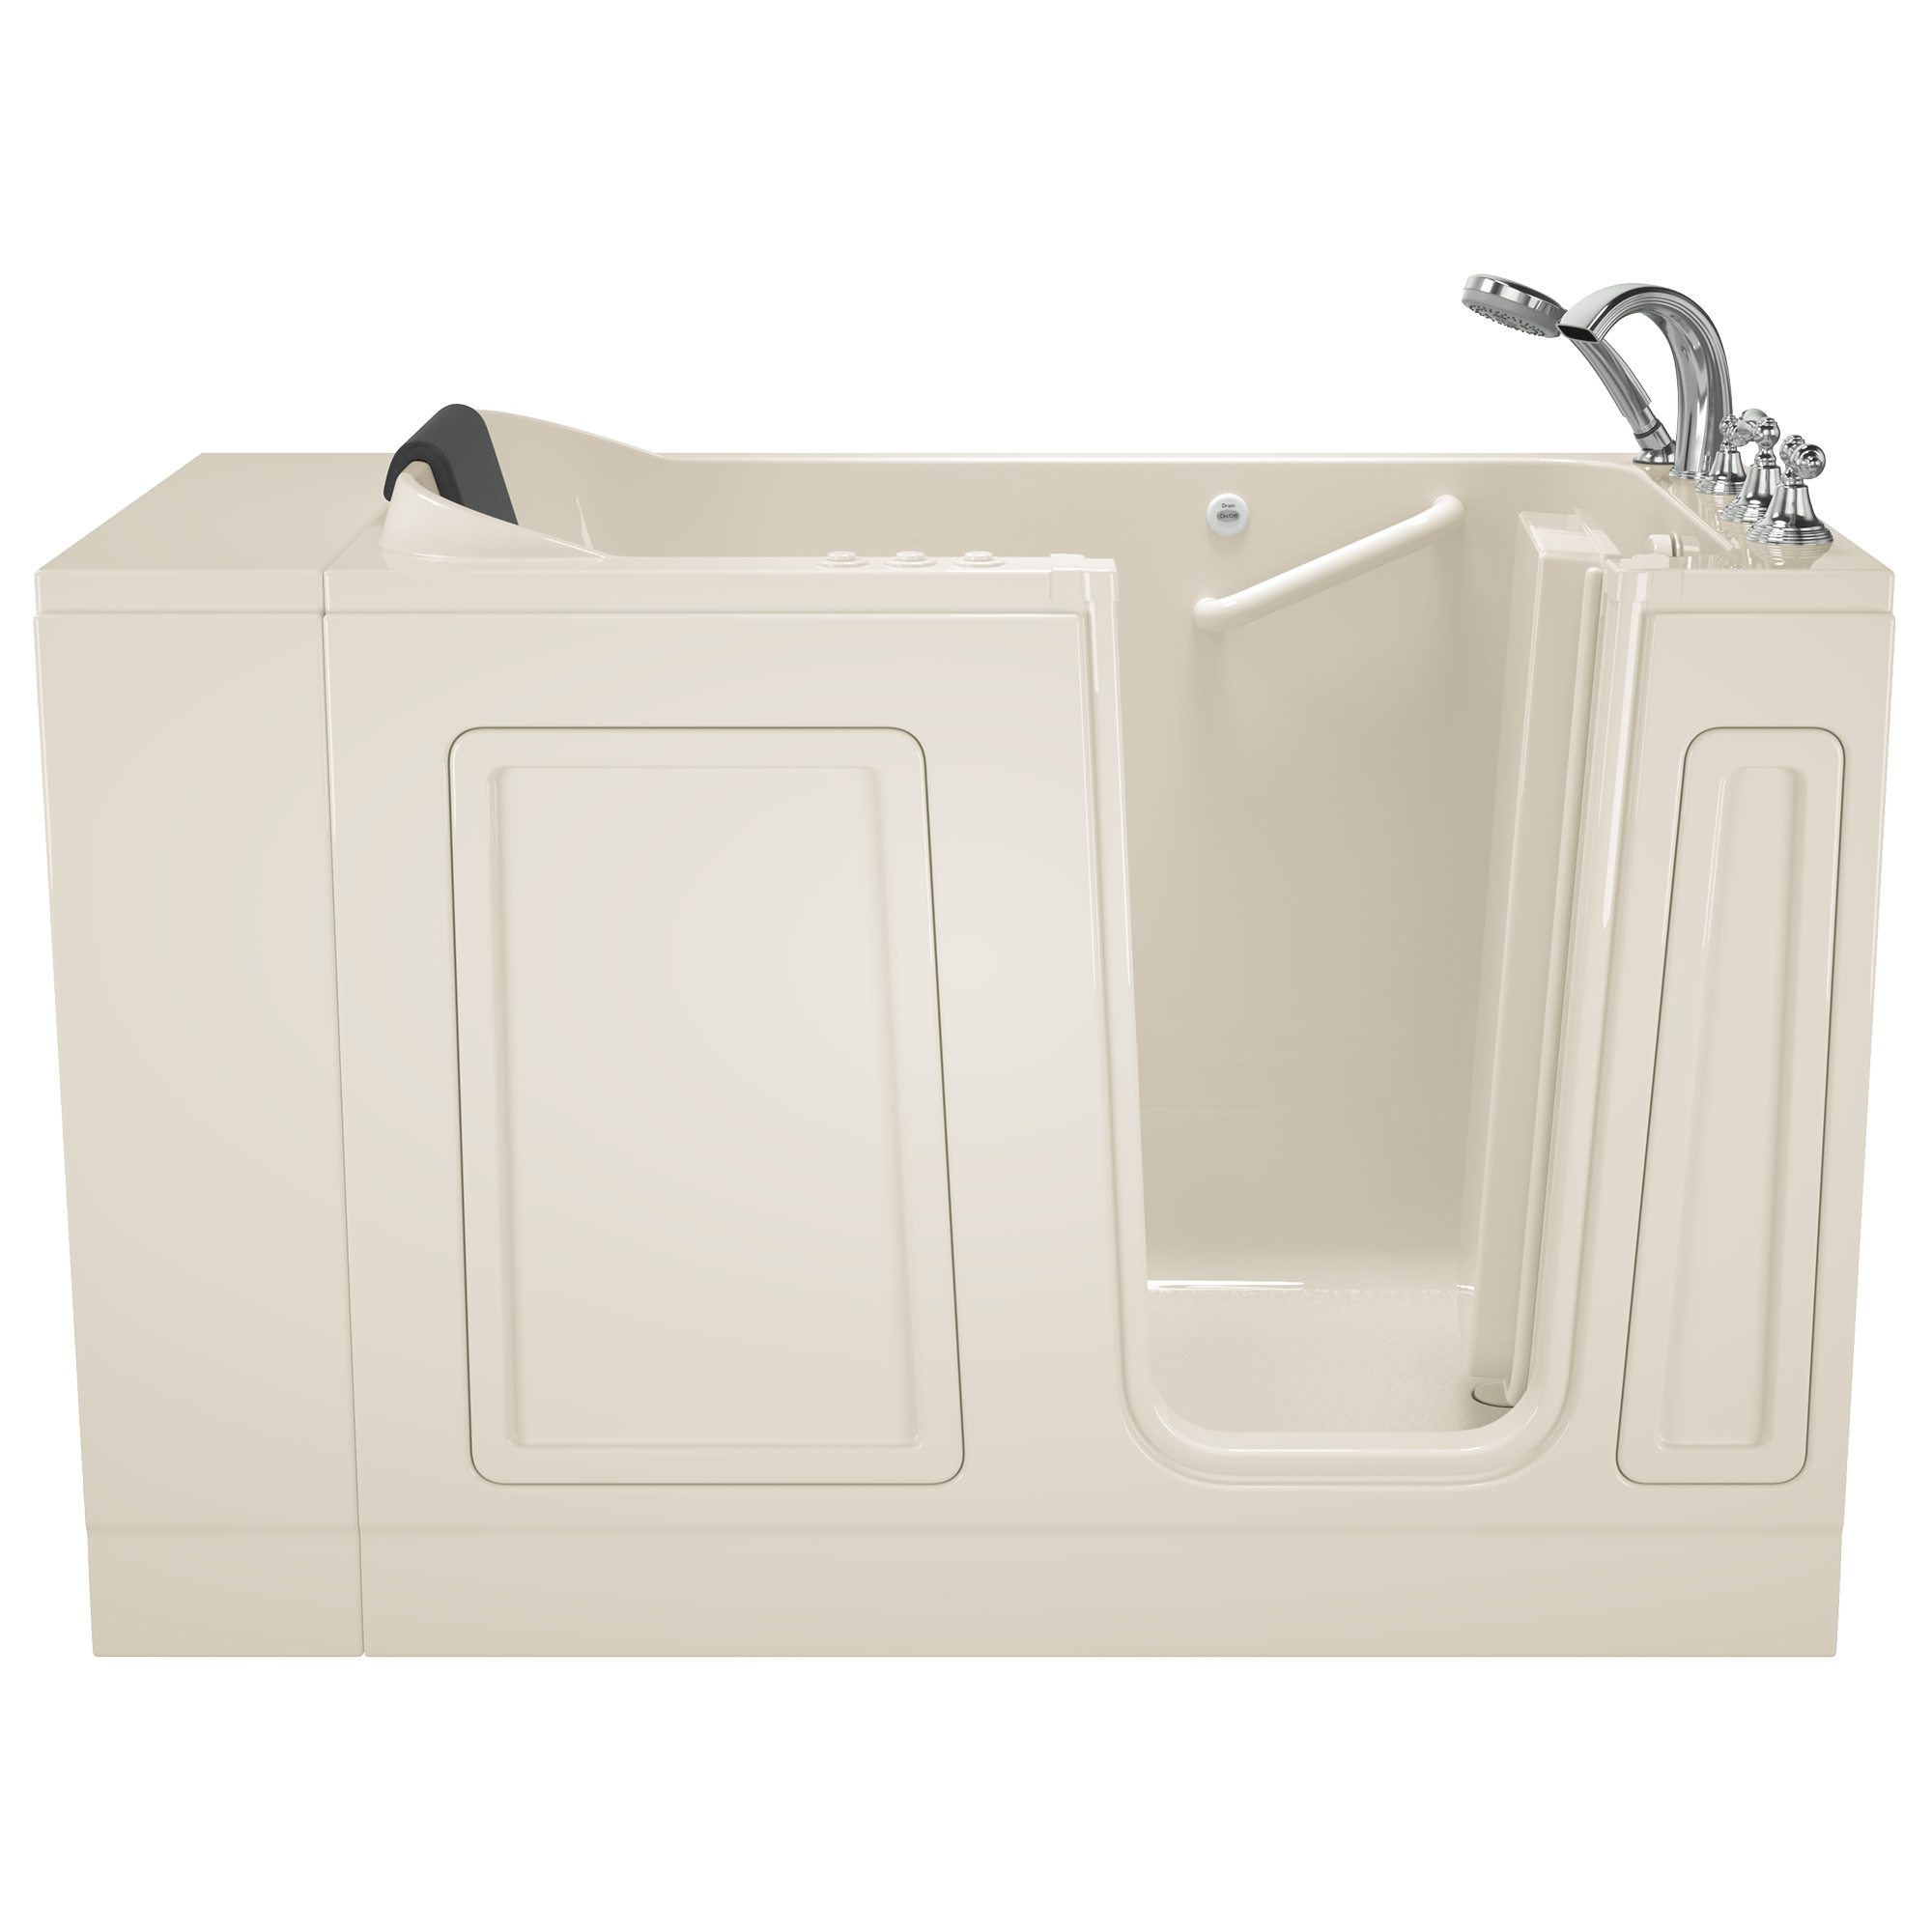 Acrylic Luxury Series 30 x 51 -Inch Walk-in Tub With Combination Air Spa and Whirlpool Systems - Right-Hand Drain With Faucet